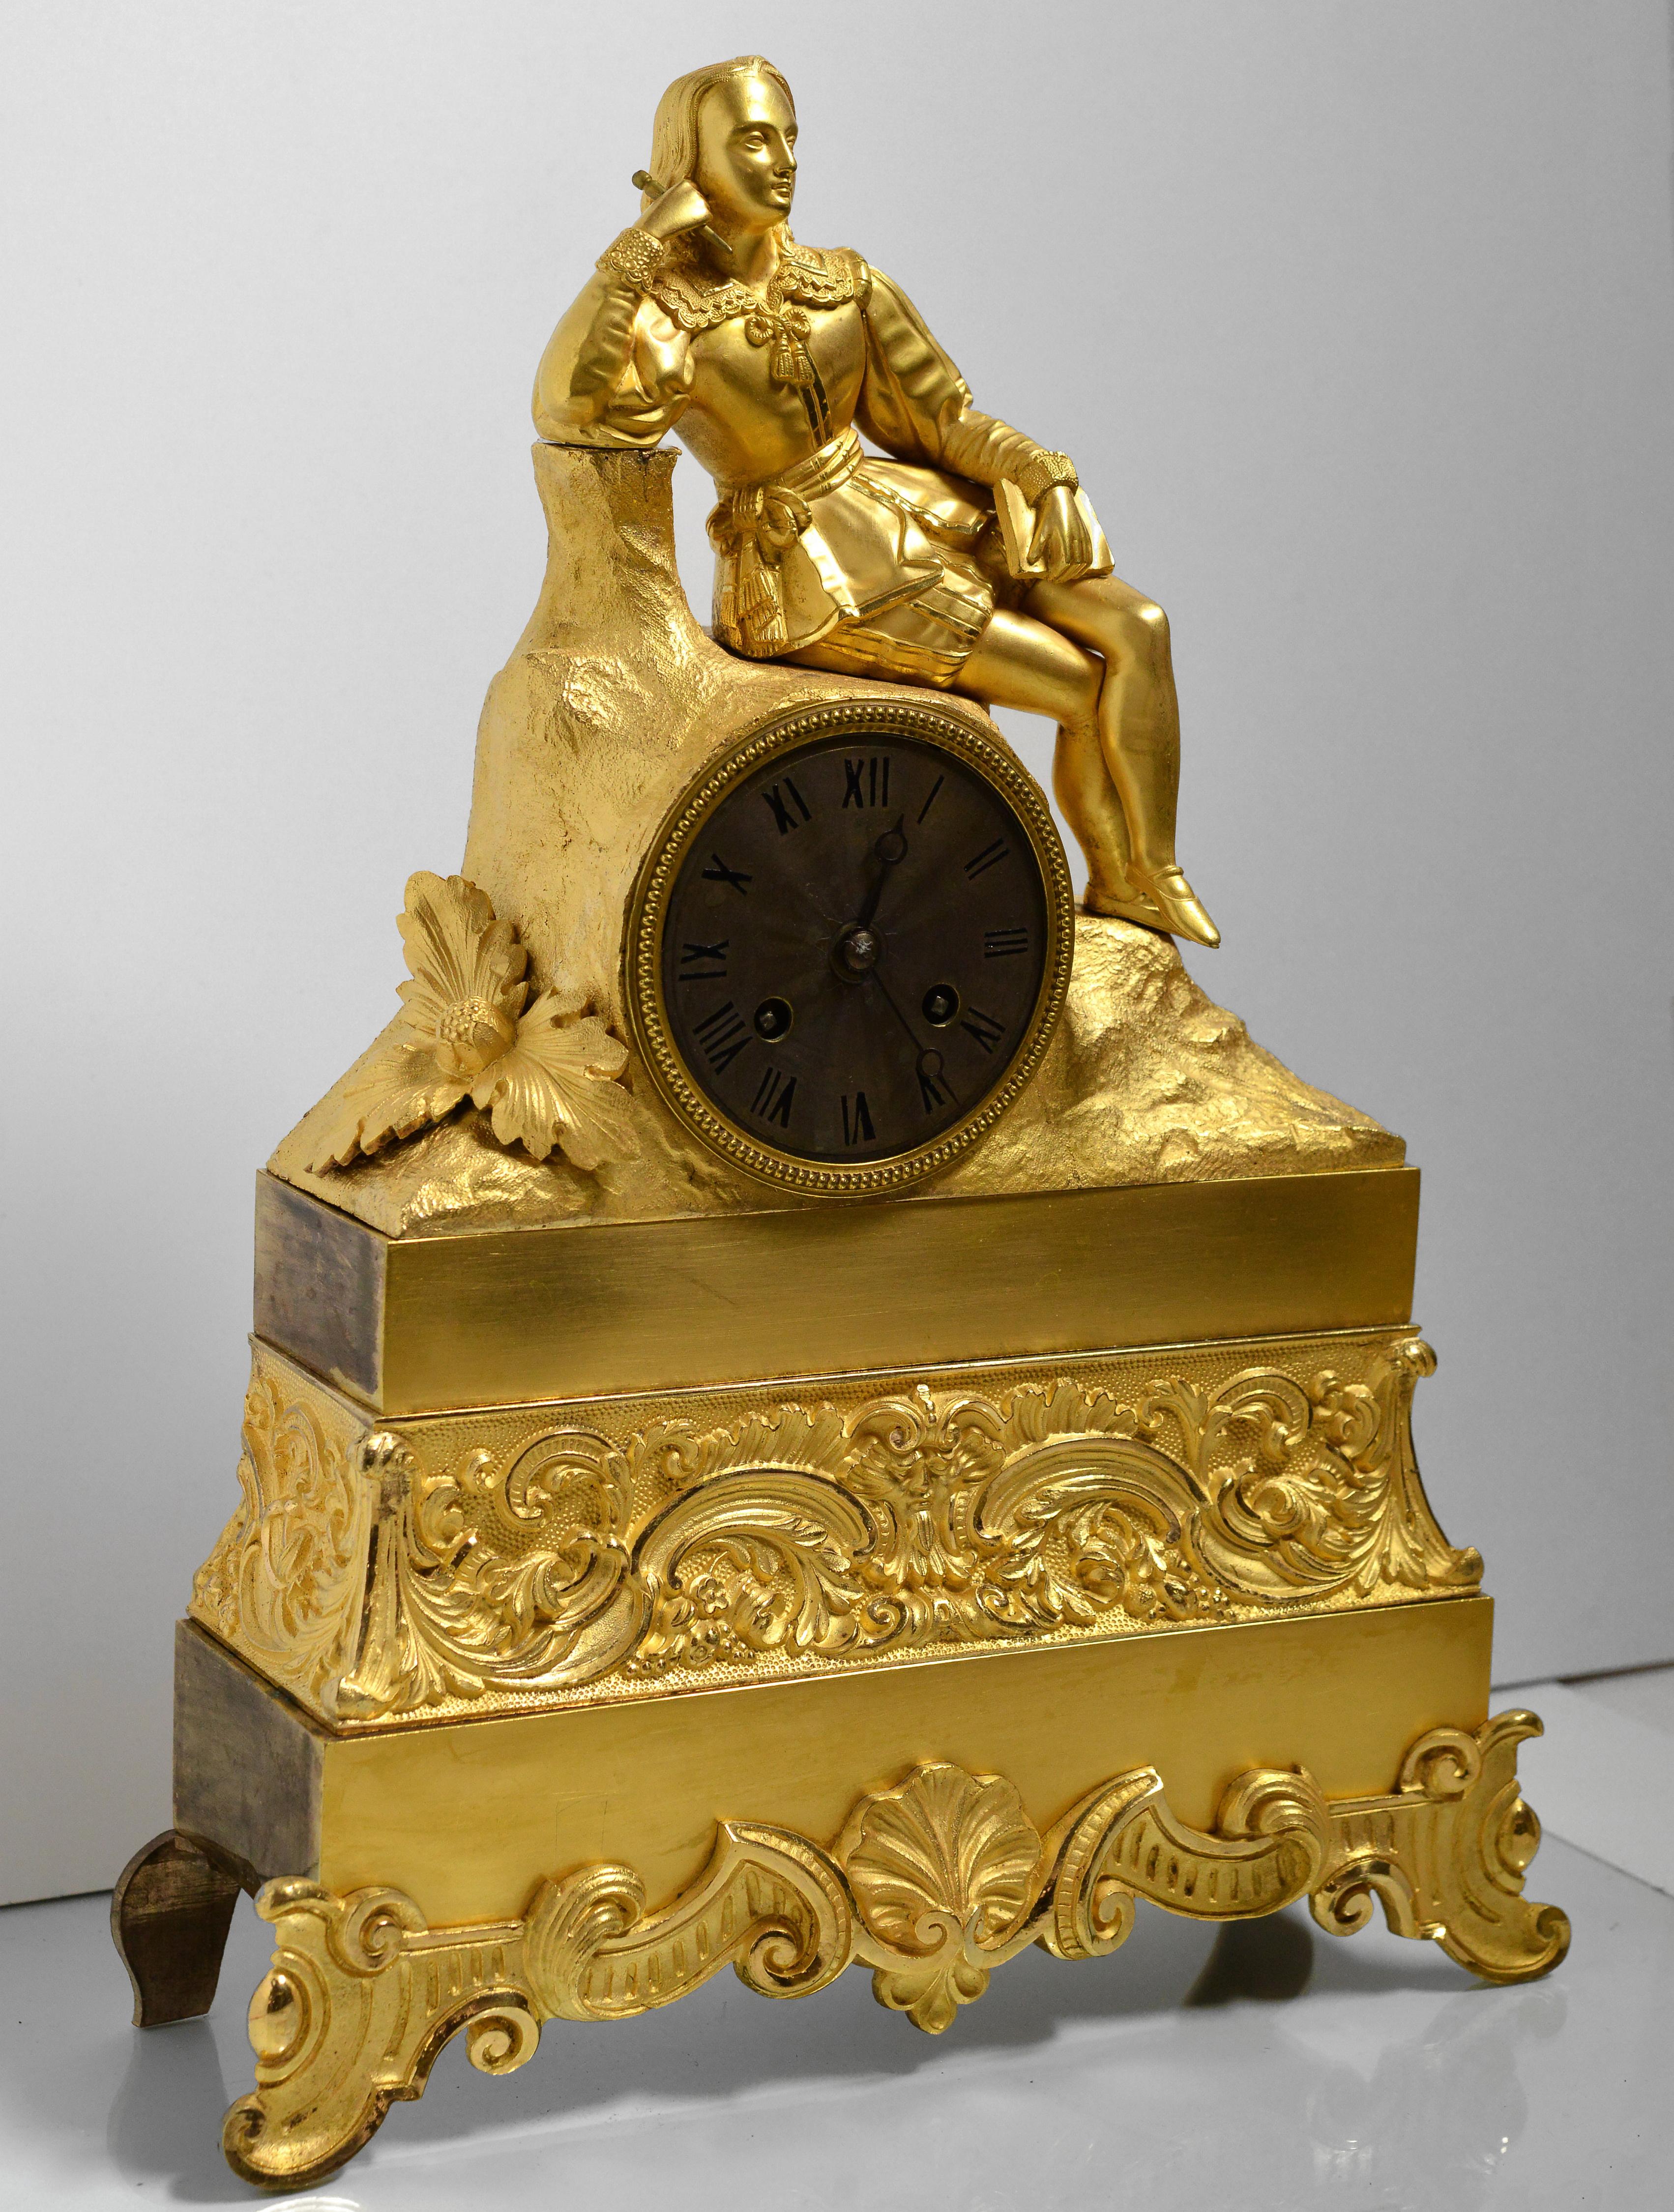 Fine and elegant work of gold-plated bronze as mantel clock in the romantic style. Guilloche silvered dial covered with patina. The bronze sculpture was made using the casting technique from a wax model. At an early 19th centurу, mercury (fire)